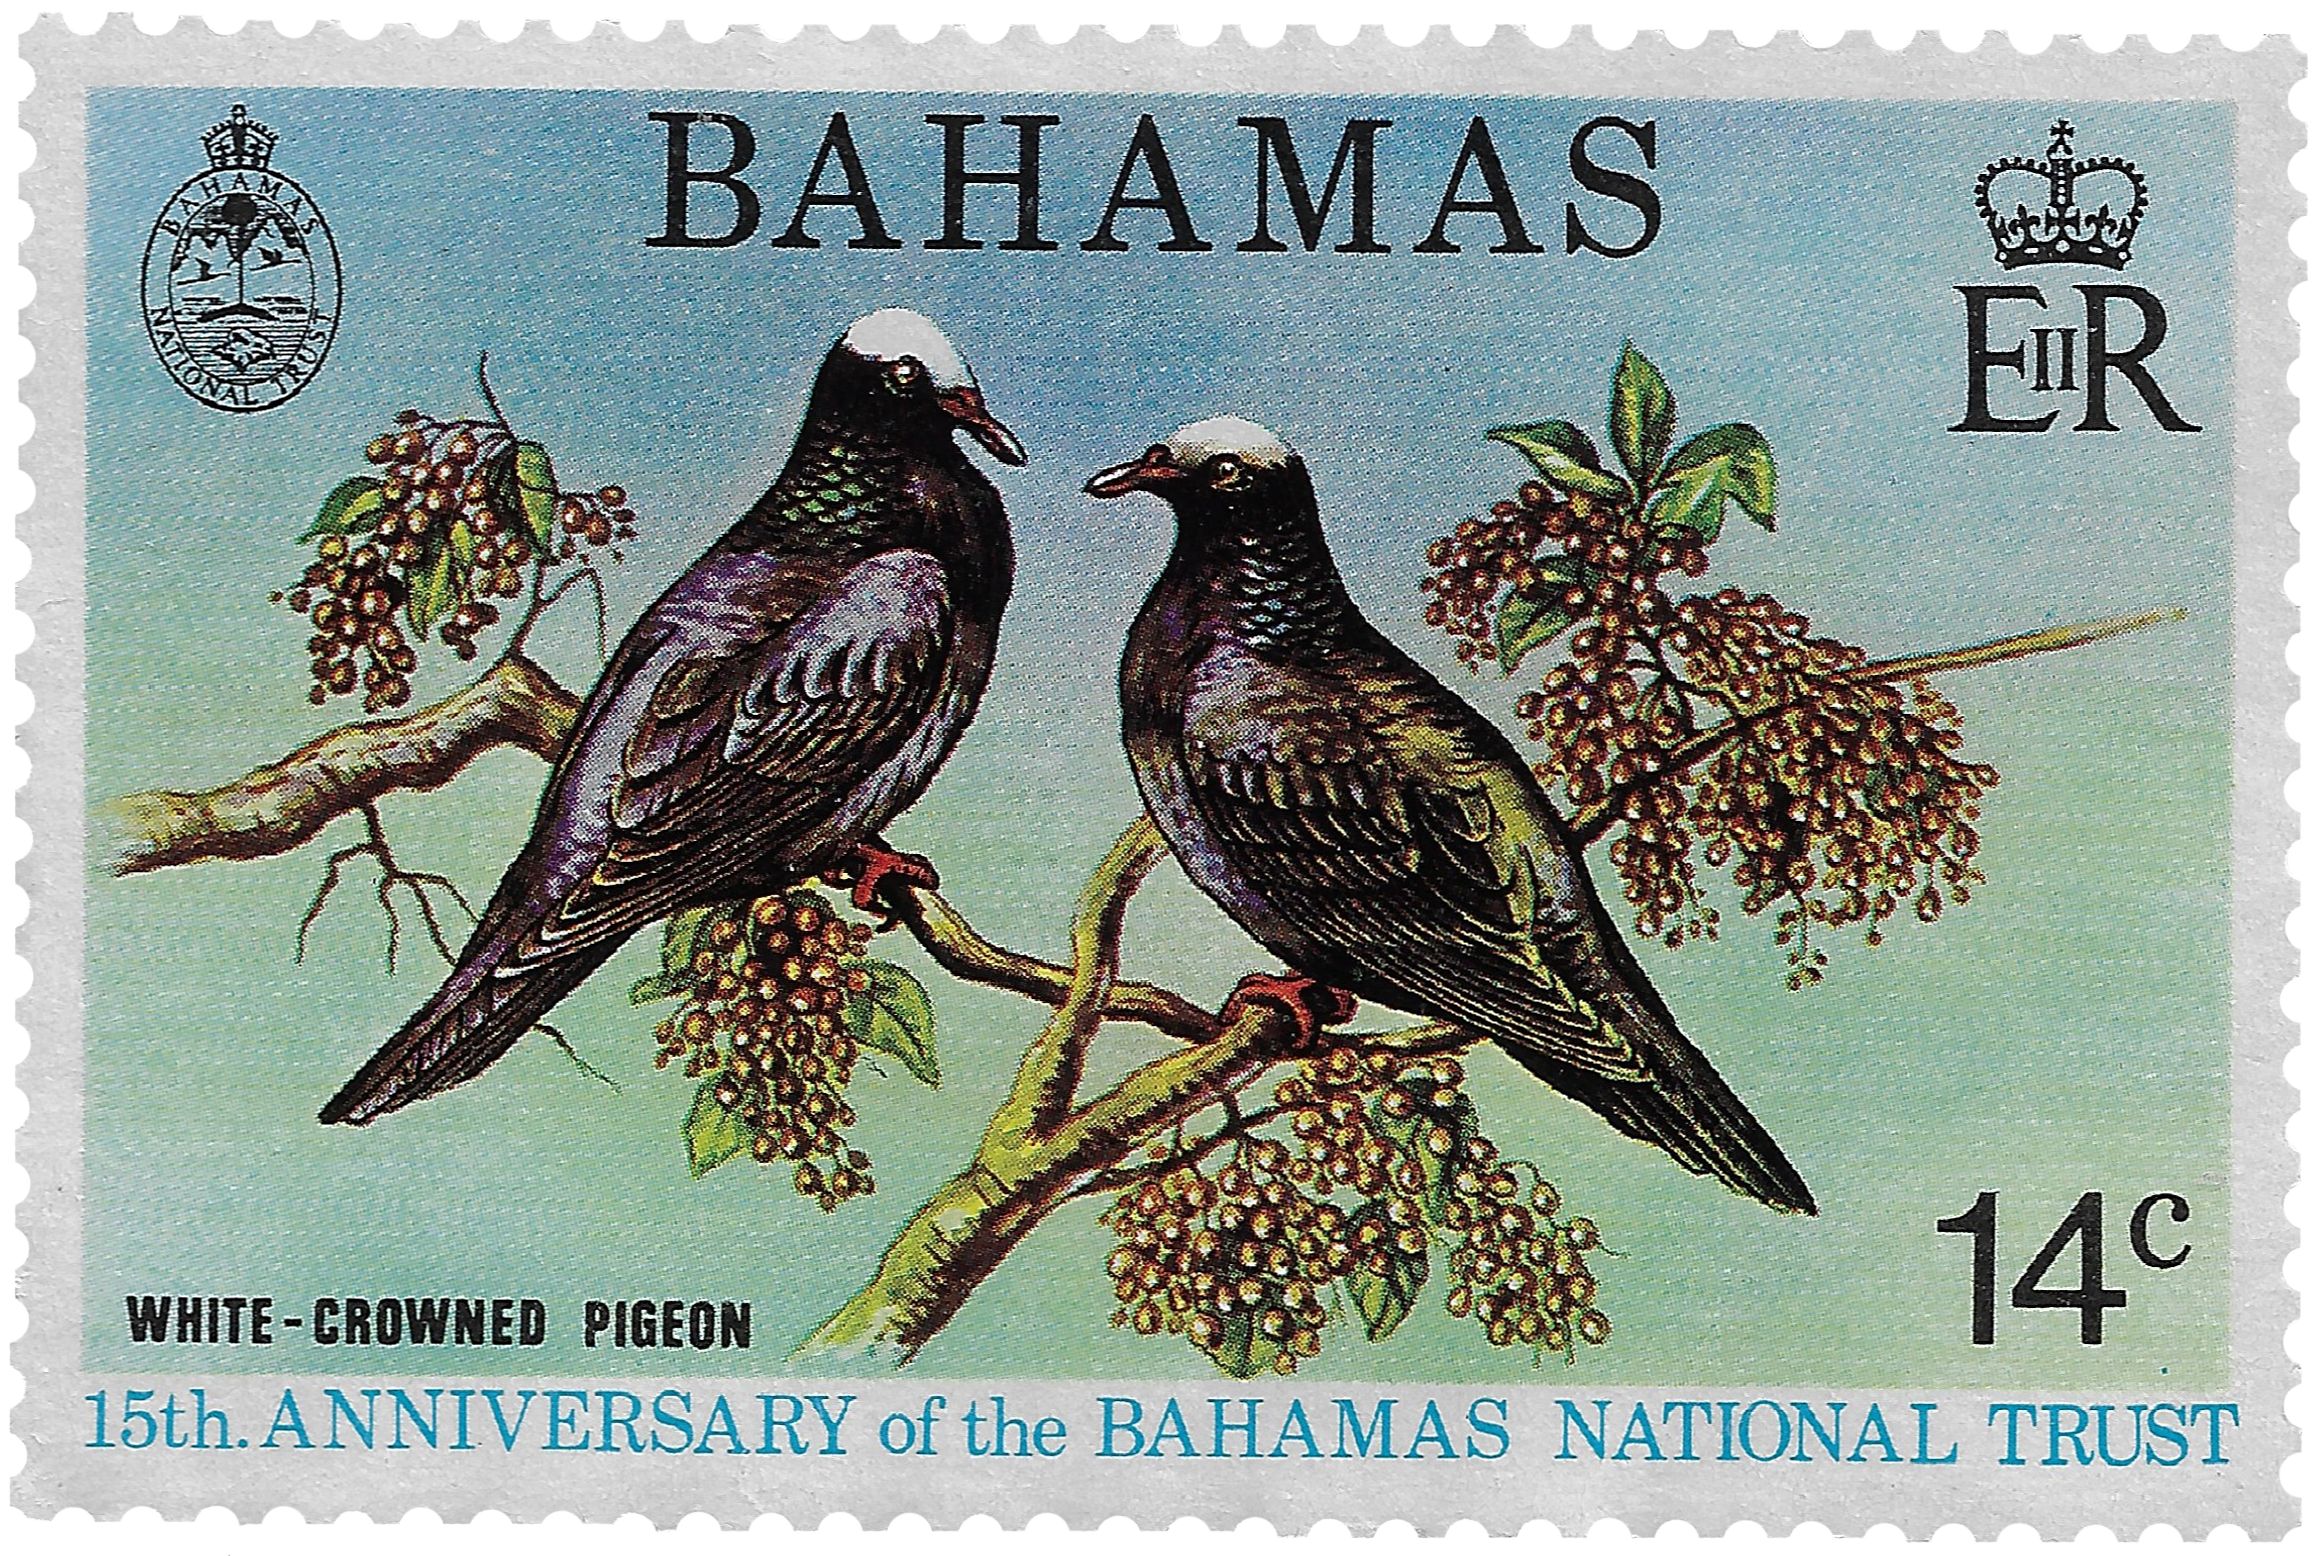 14c 1974, White-Crowned Pigeon, 15th Anniversary of the Bahamas National Trust